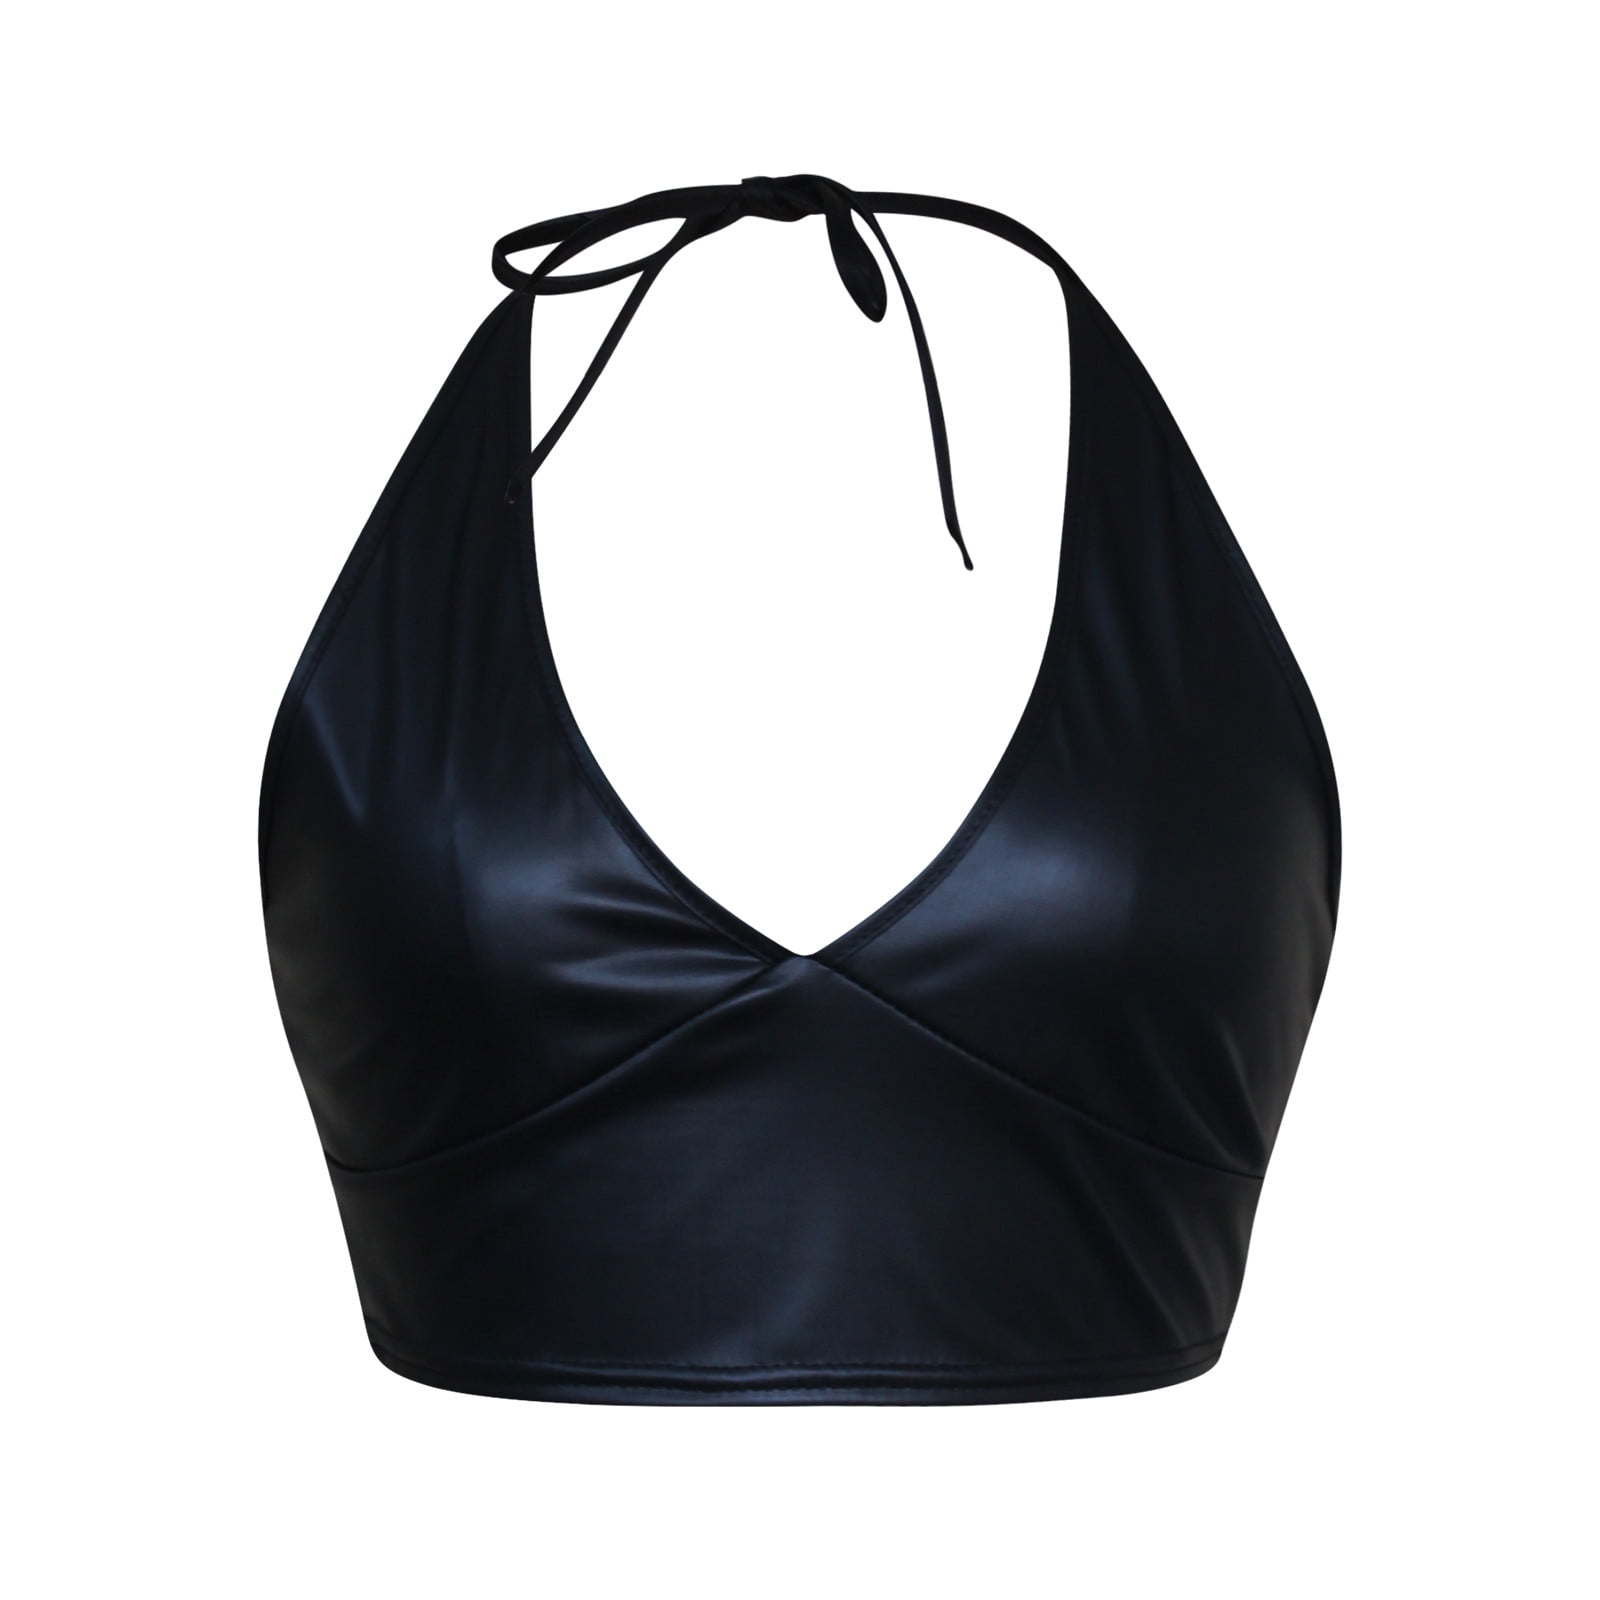 Black Pu Leather Bralette – Free From Label